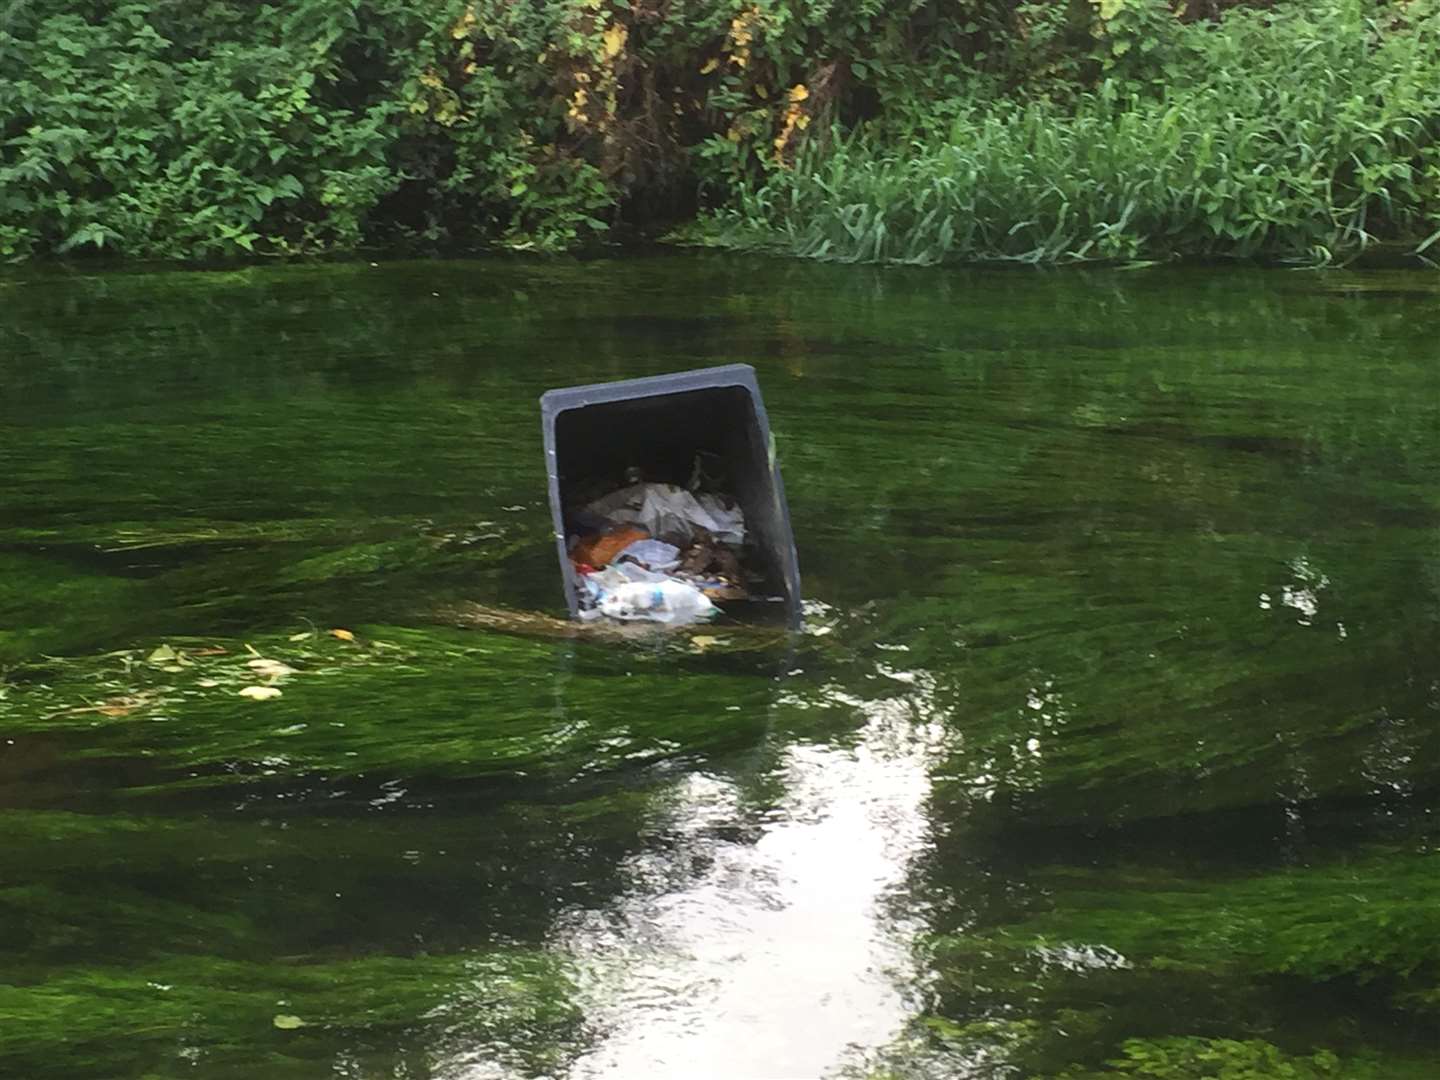 Once bins are thrown into the River Stour in Canterbury, its contents pour out and into the water